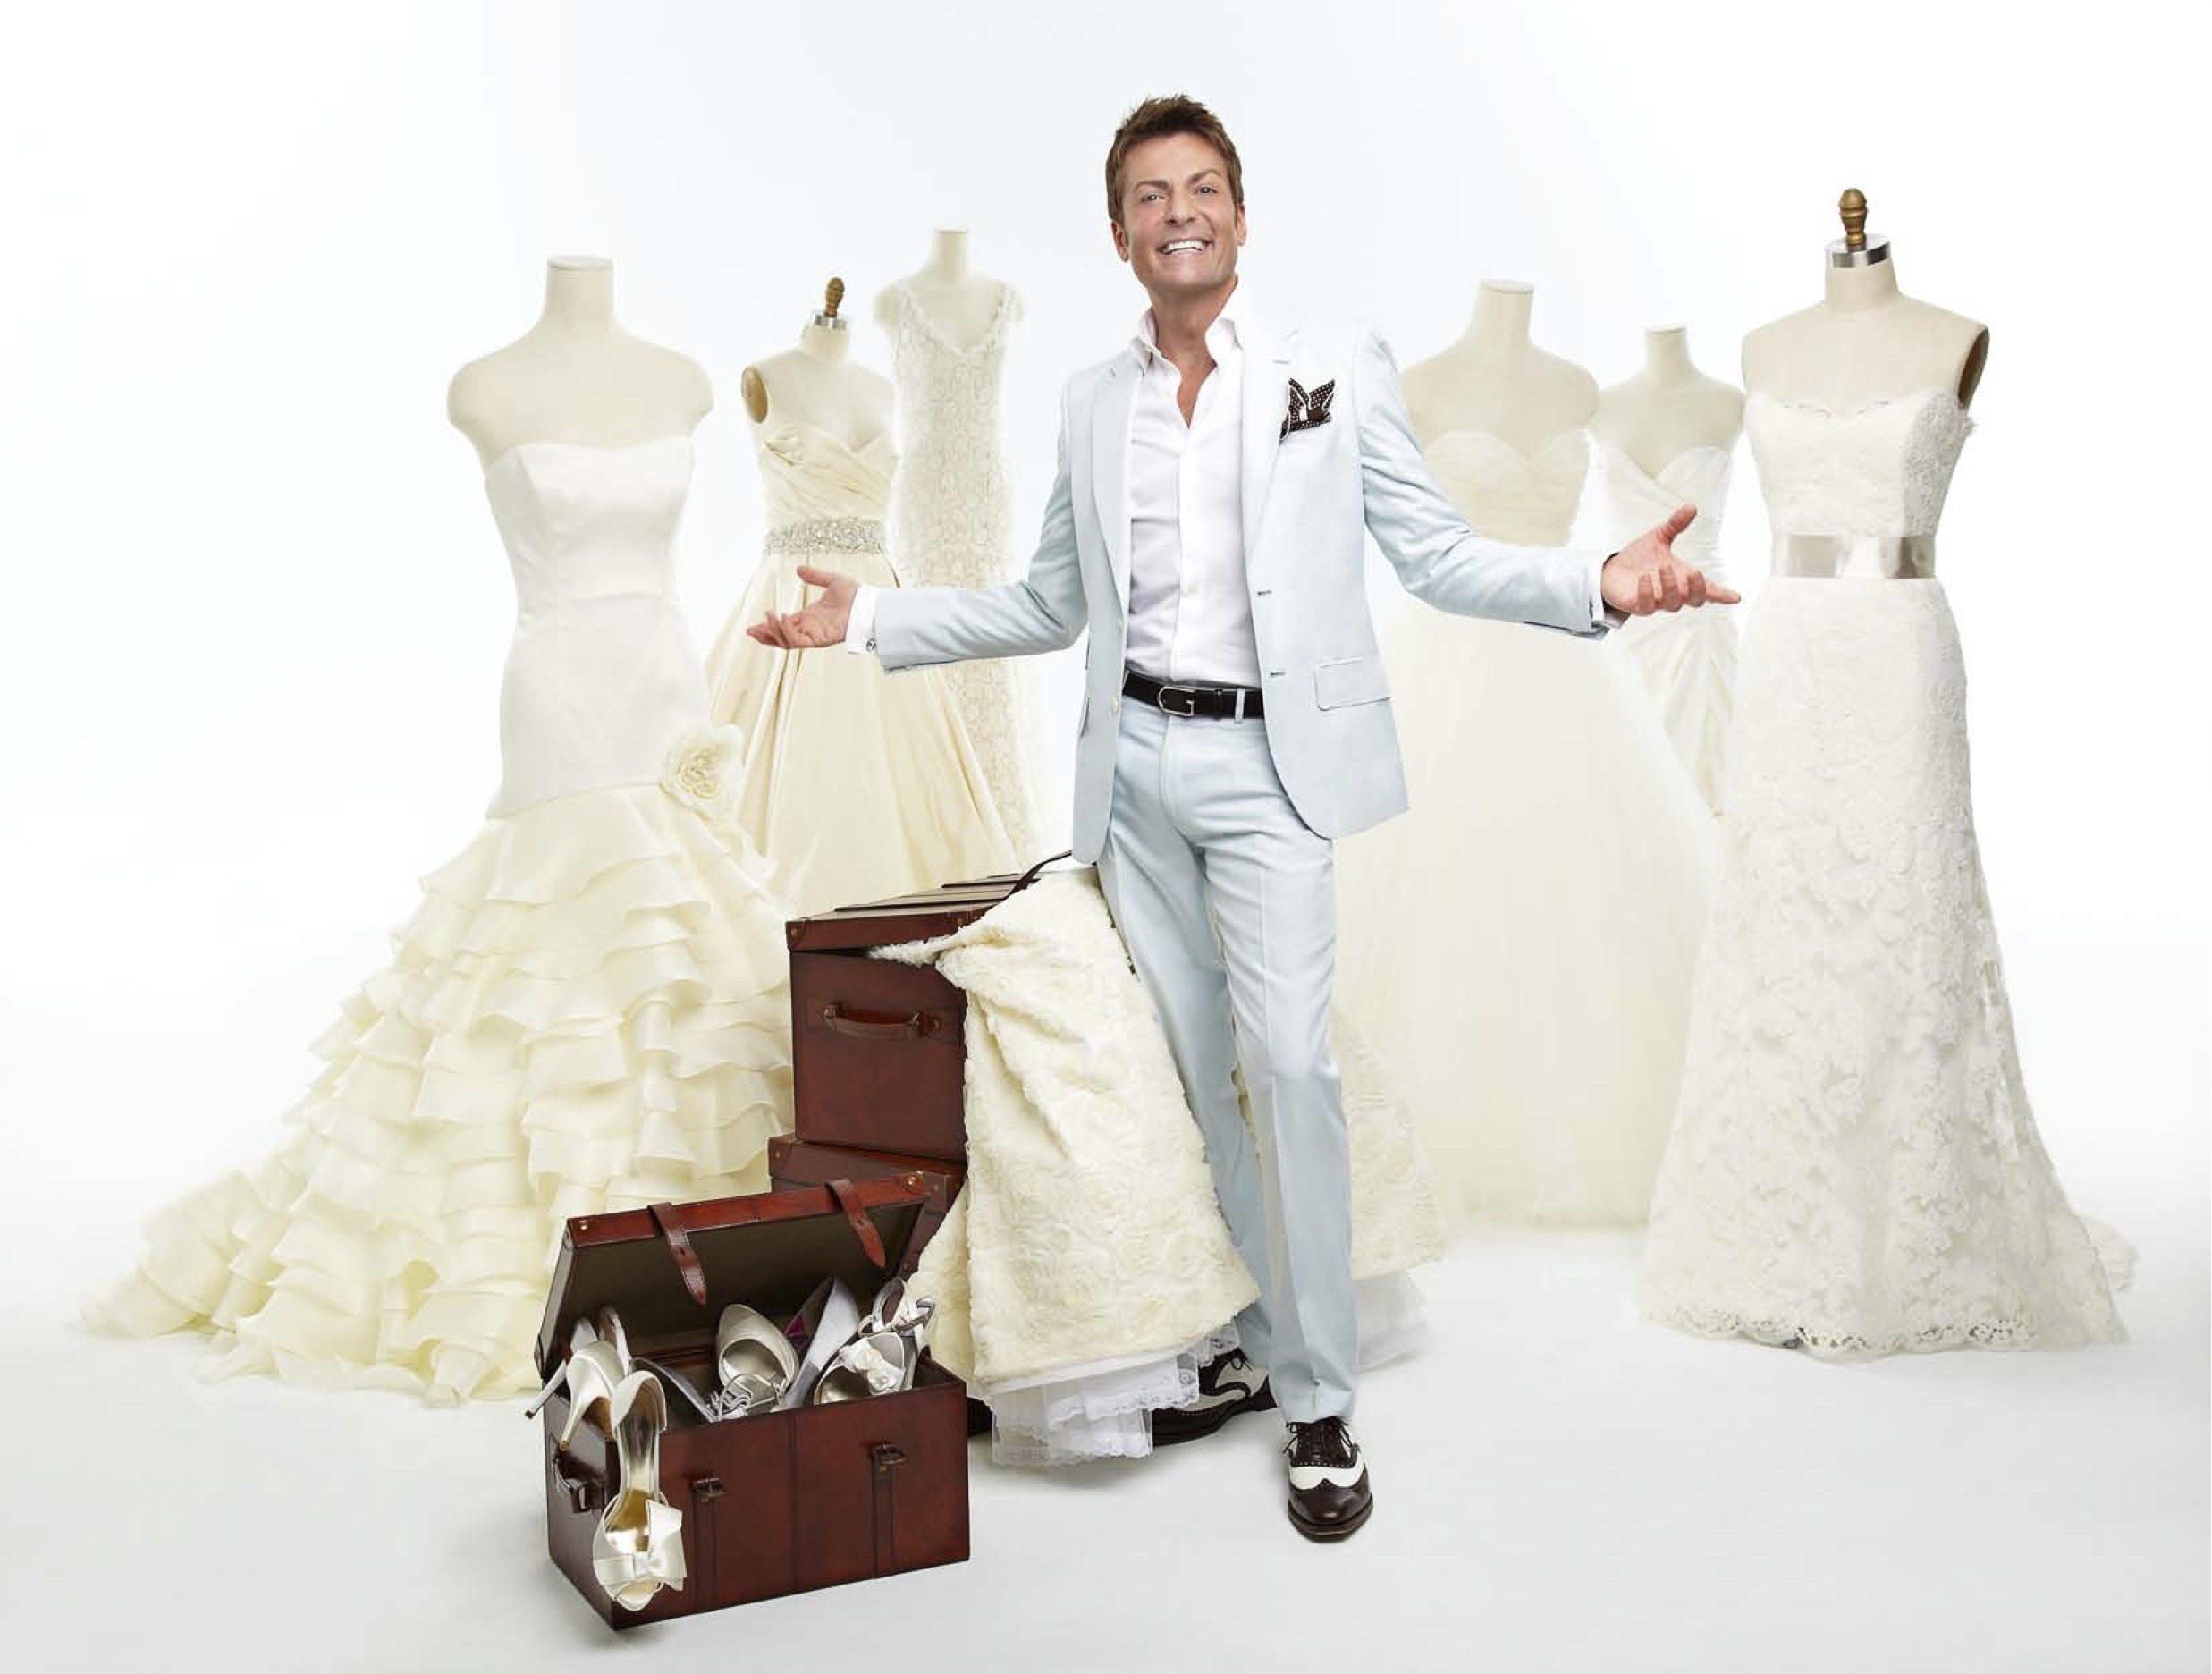 Randy Fenoli, from TLC’s reality series “Say Yes to the Dress,” at Michigan International Women’s Show